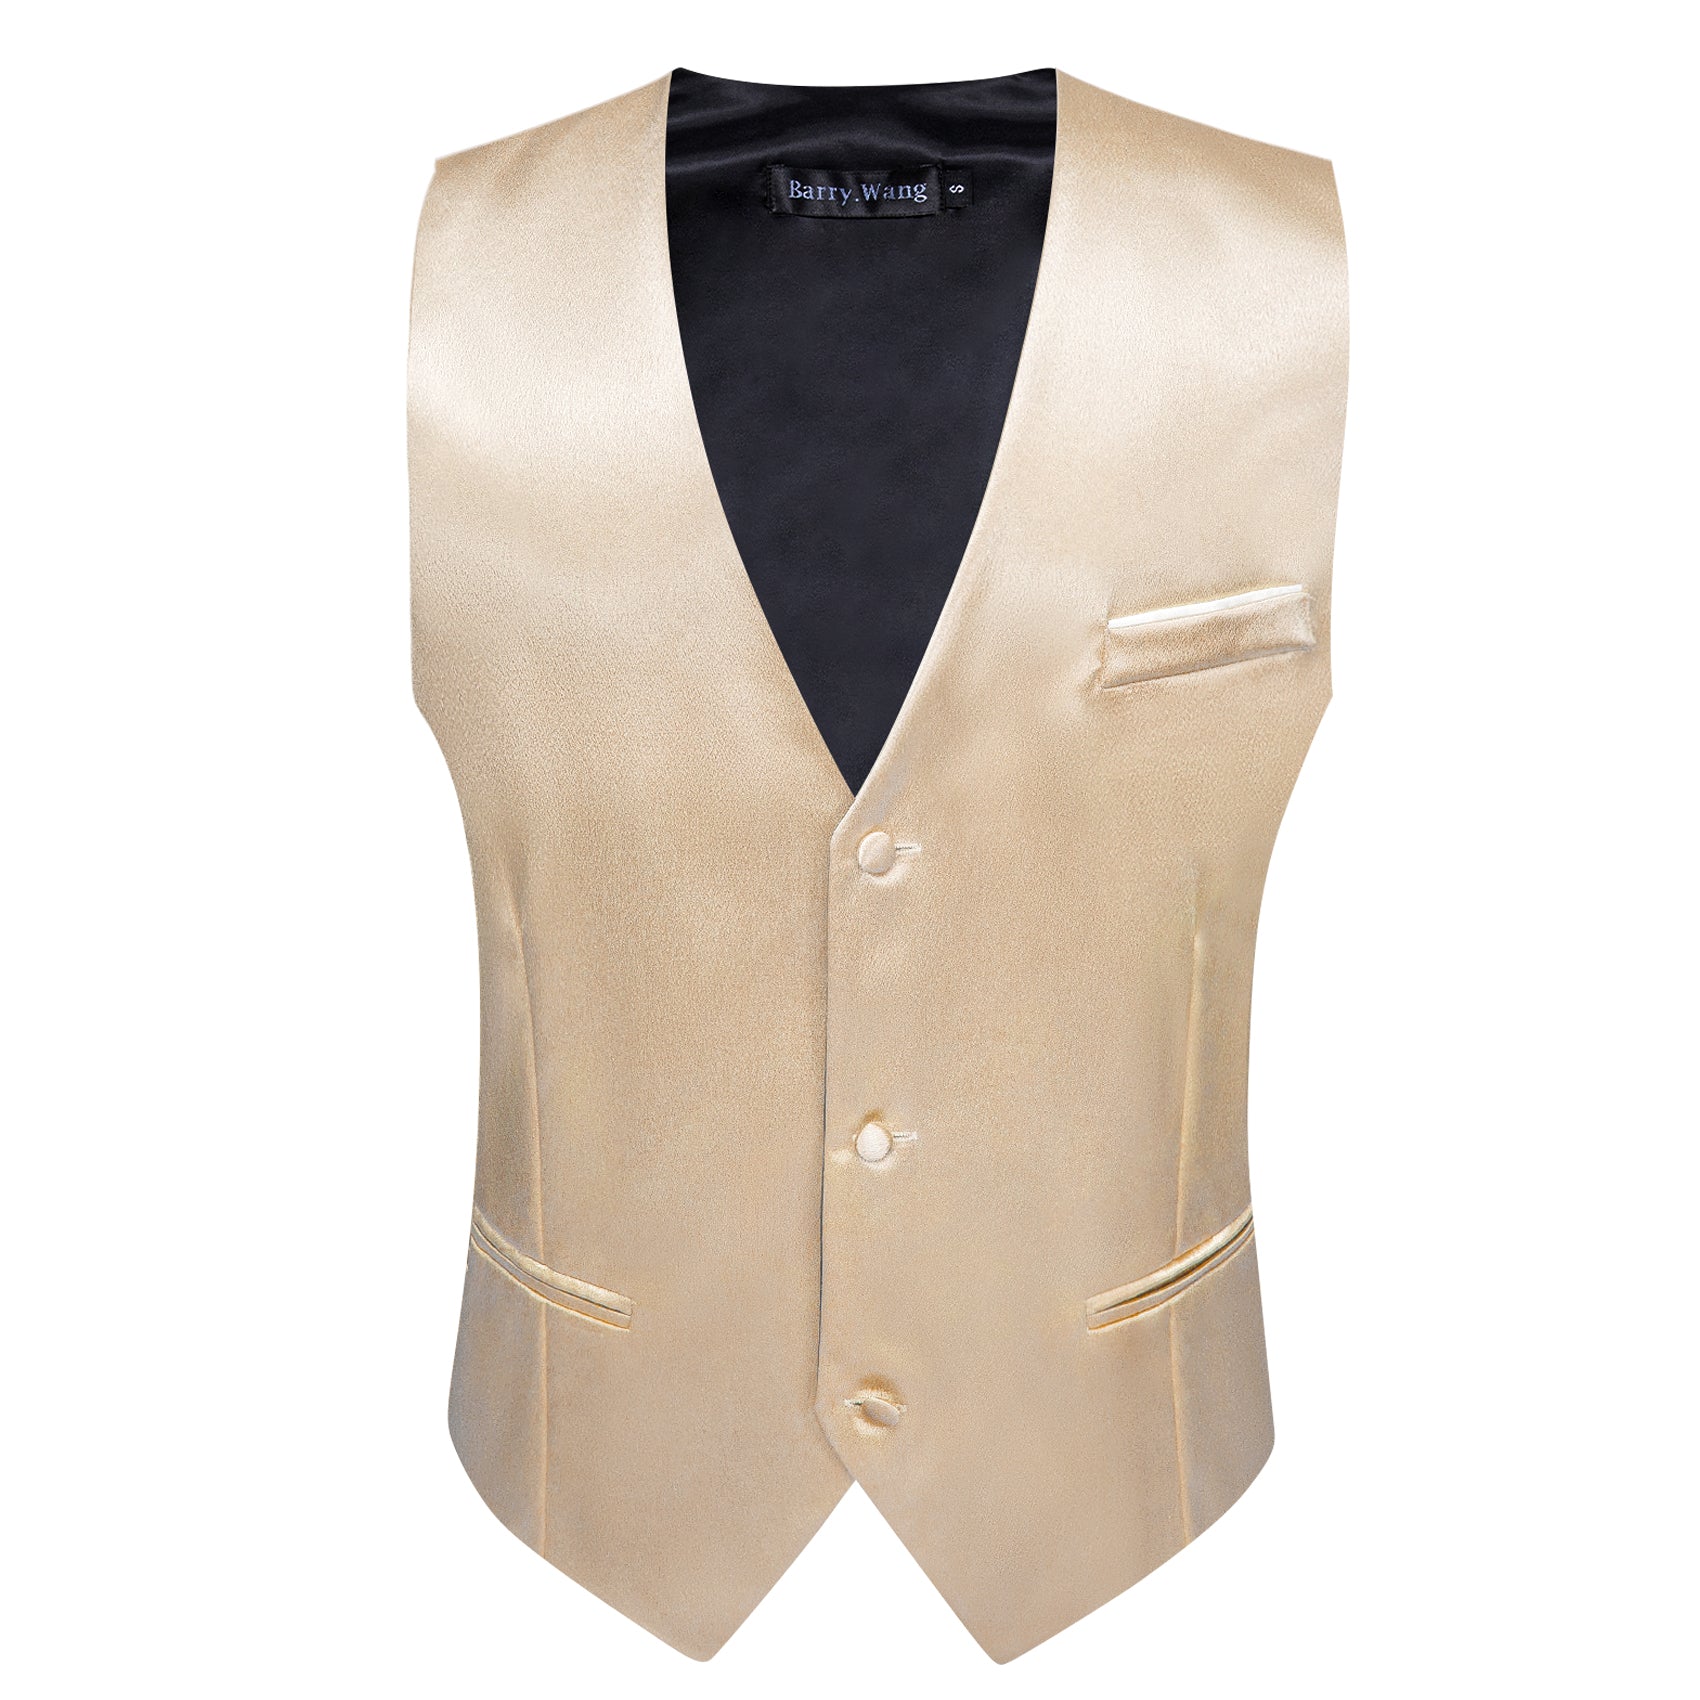 Wheat Solid Silk Waistcoat Vest for Party